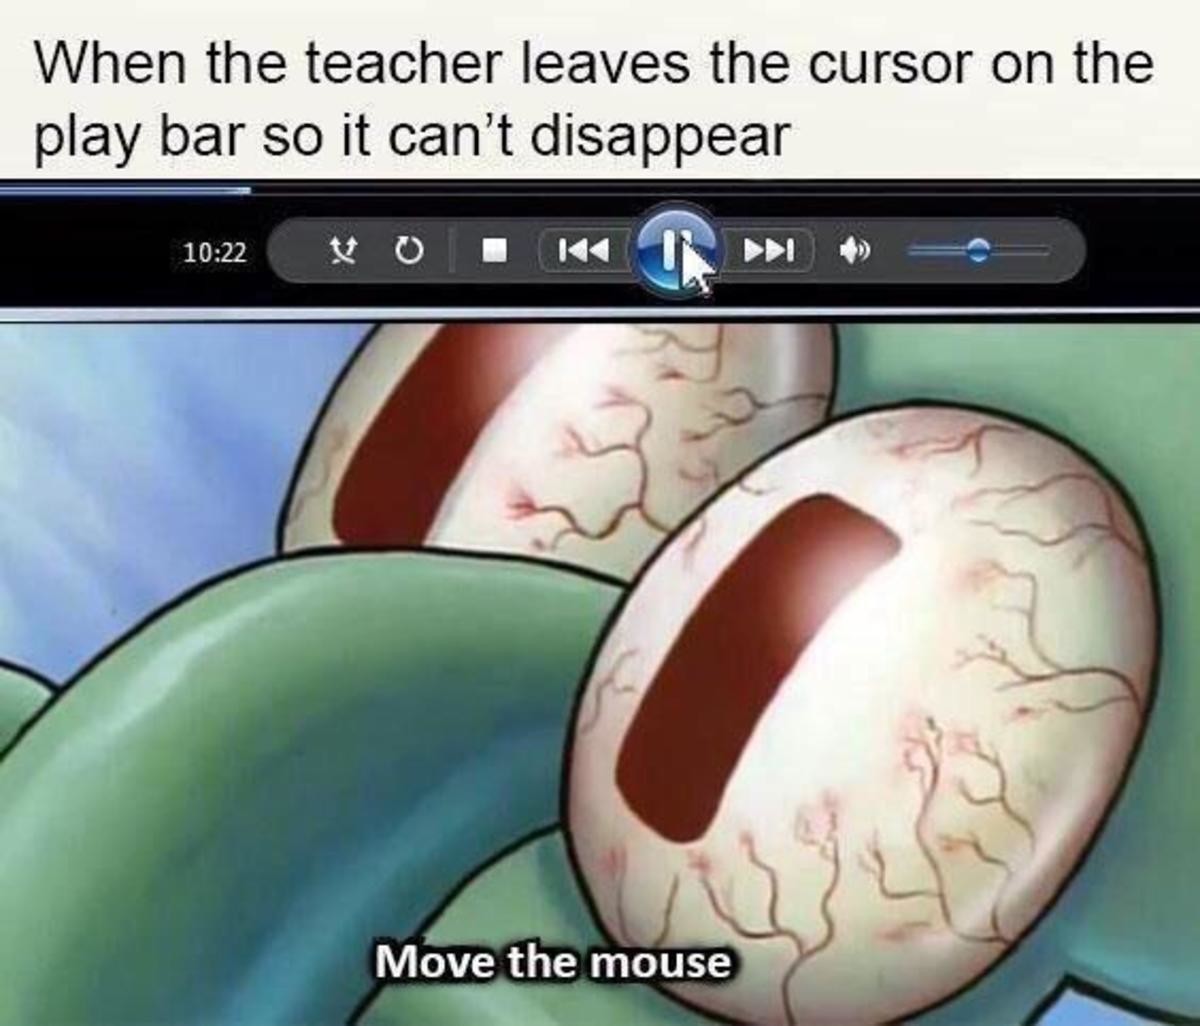 They all do this. . When ' leaves ' cursor on the play bar (' i. fatl it Brigit' iti' i disappear Move the mouse. Every teacher, every class even if you do tell them to move it.